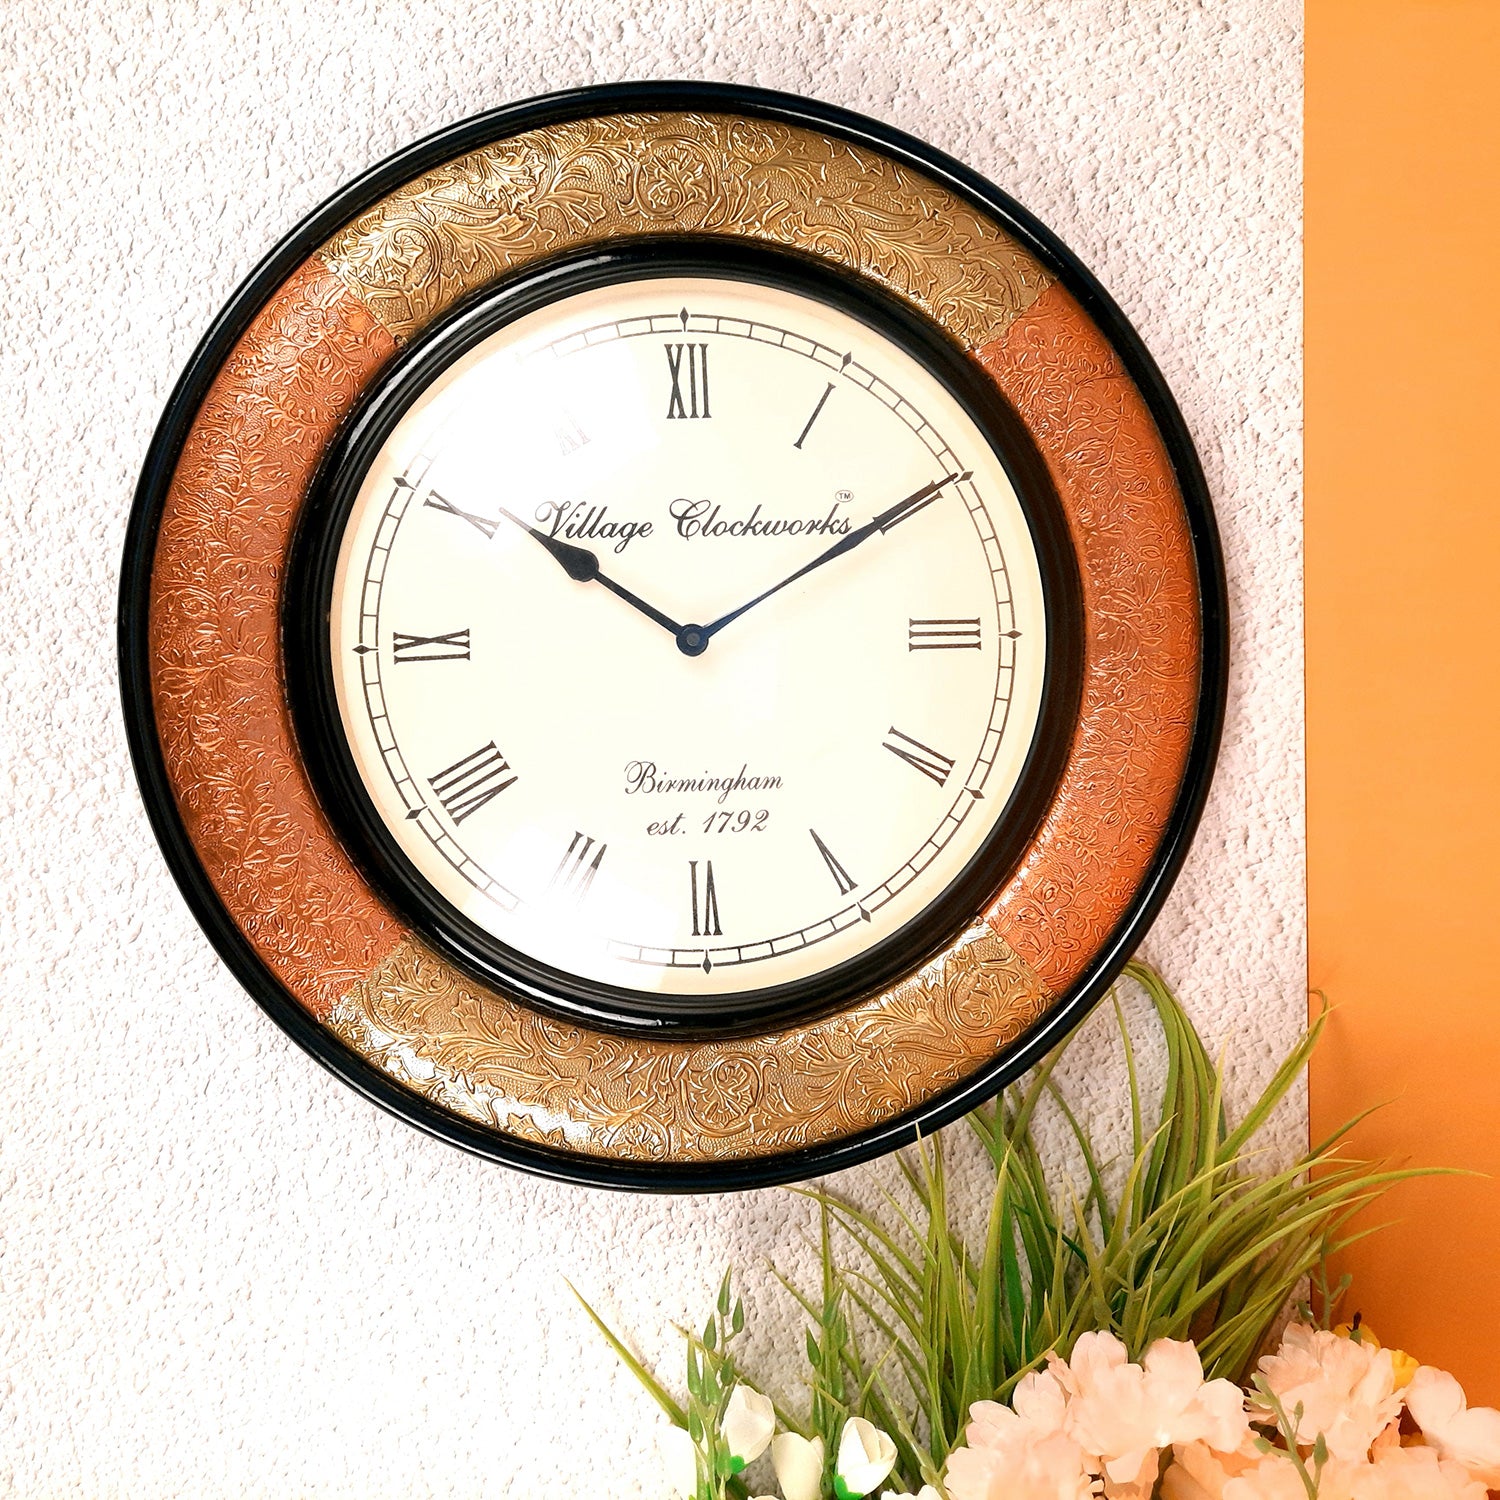 Wall Clock for Home | Wall Mount Analogue Clock Antique - For Living Room, Bedroom, Hall, Office Decor & Gift- 18 Inch - Apkamart